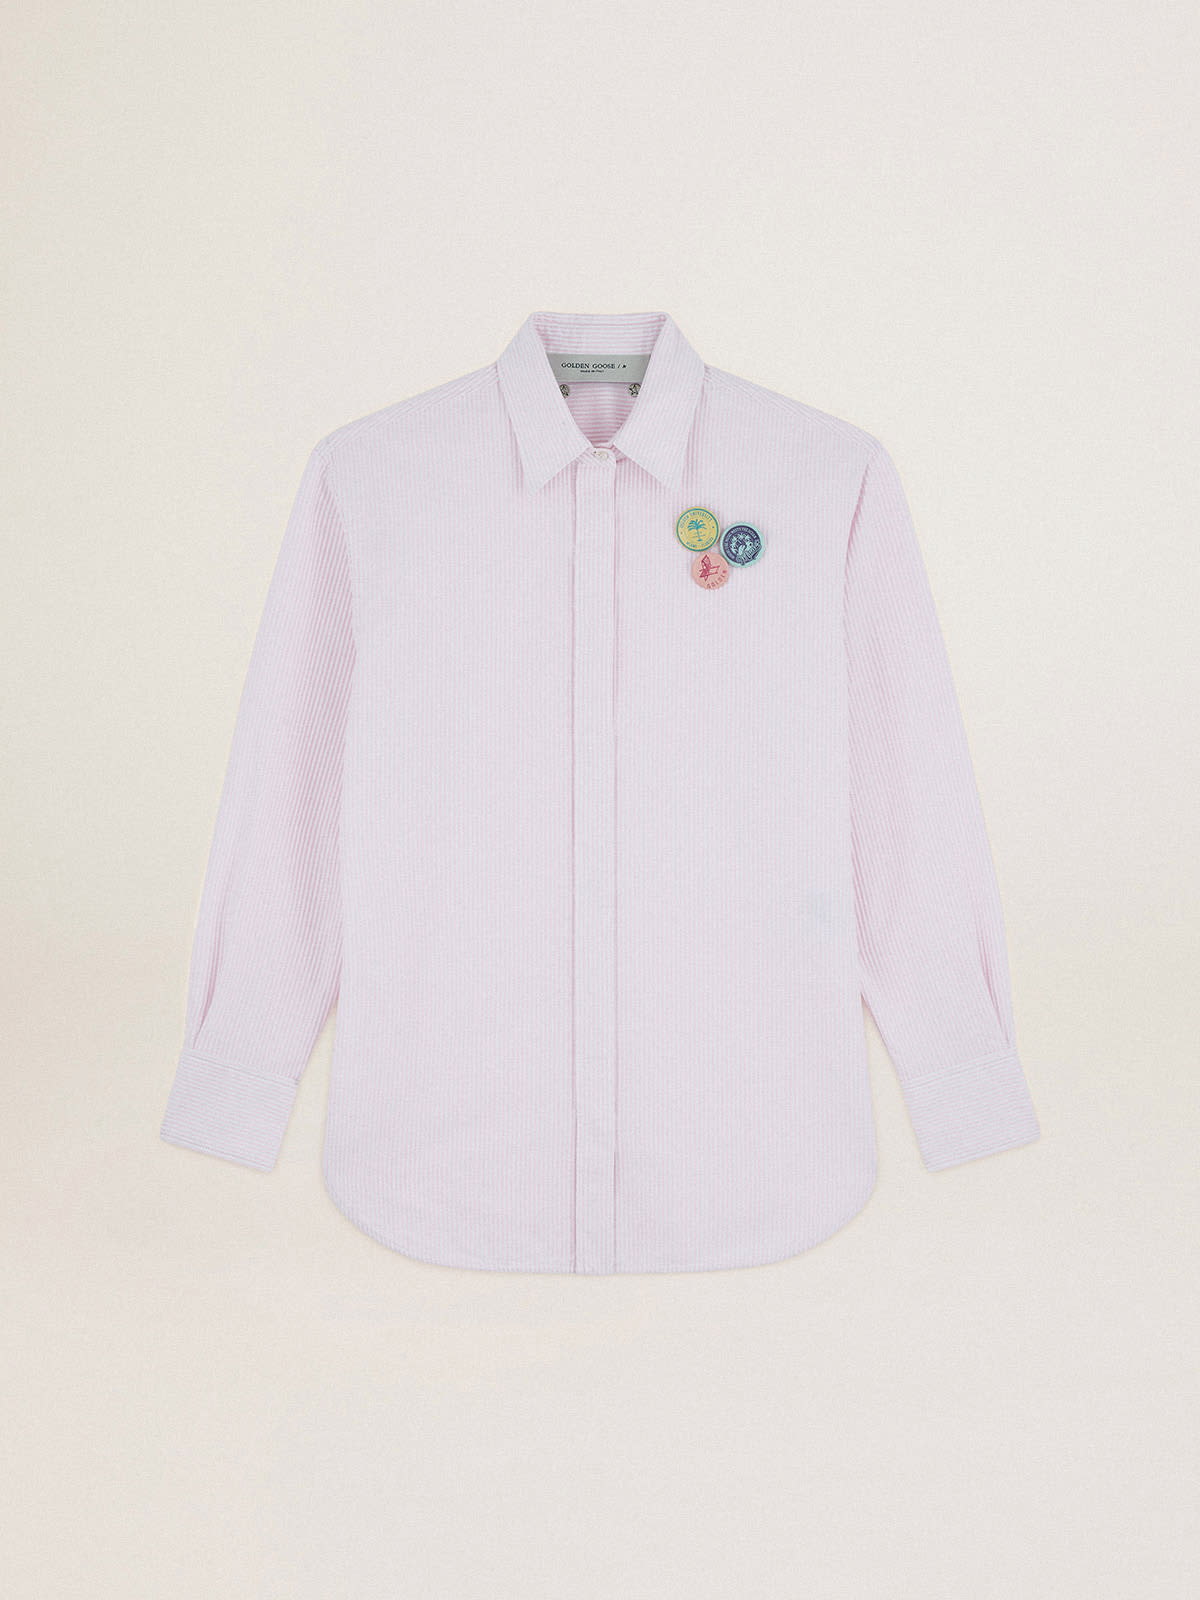 Golden Goose - Oversized Journey Collection shirt with pink and white vertical stripes and pins in 